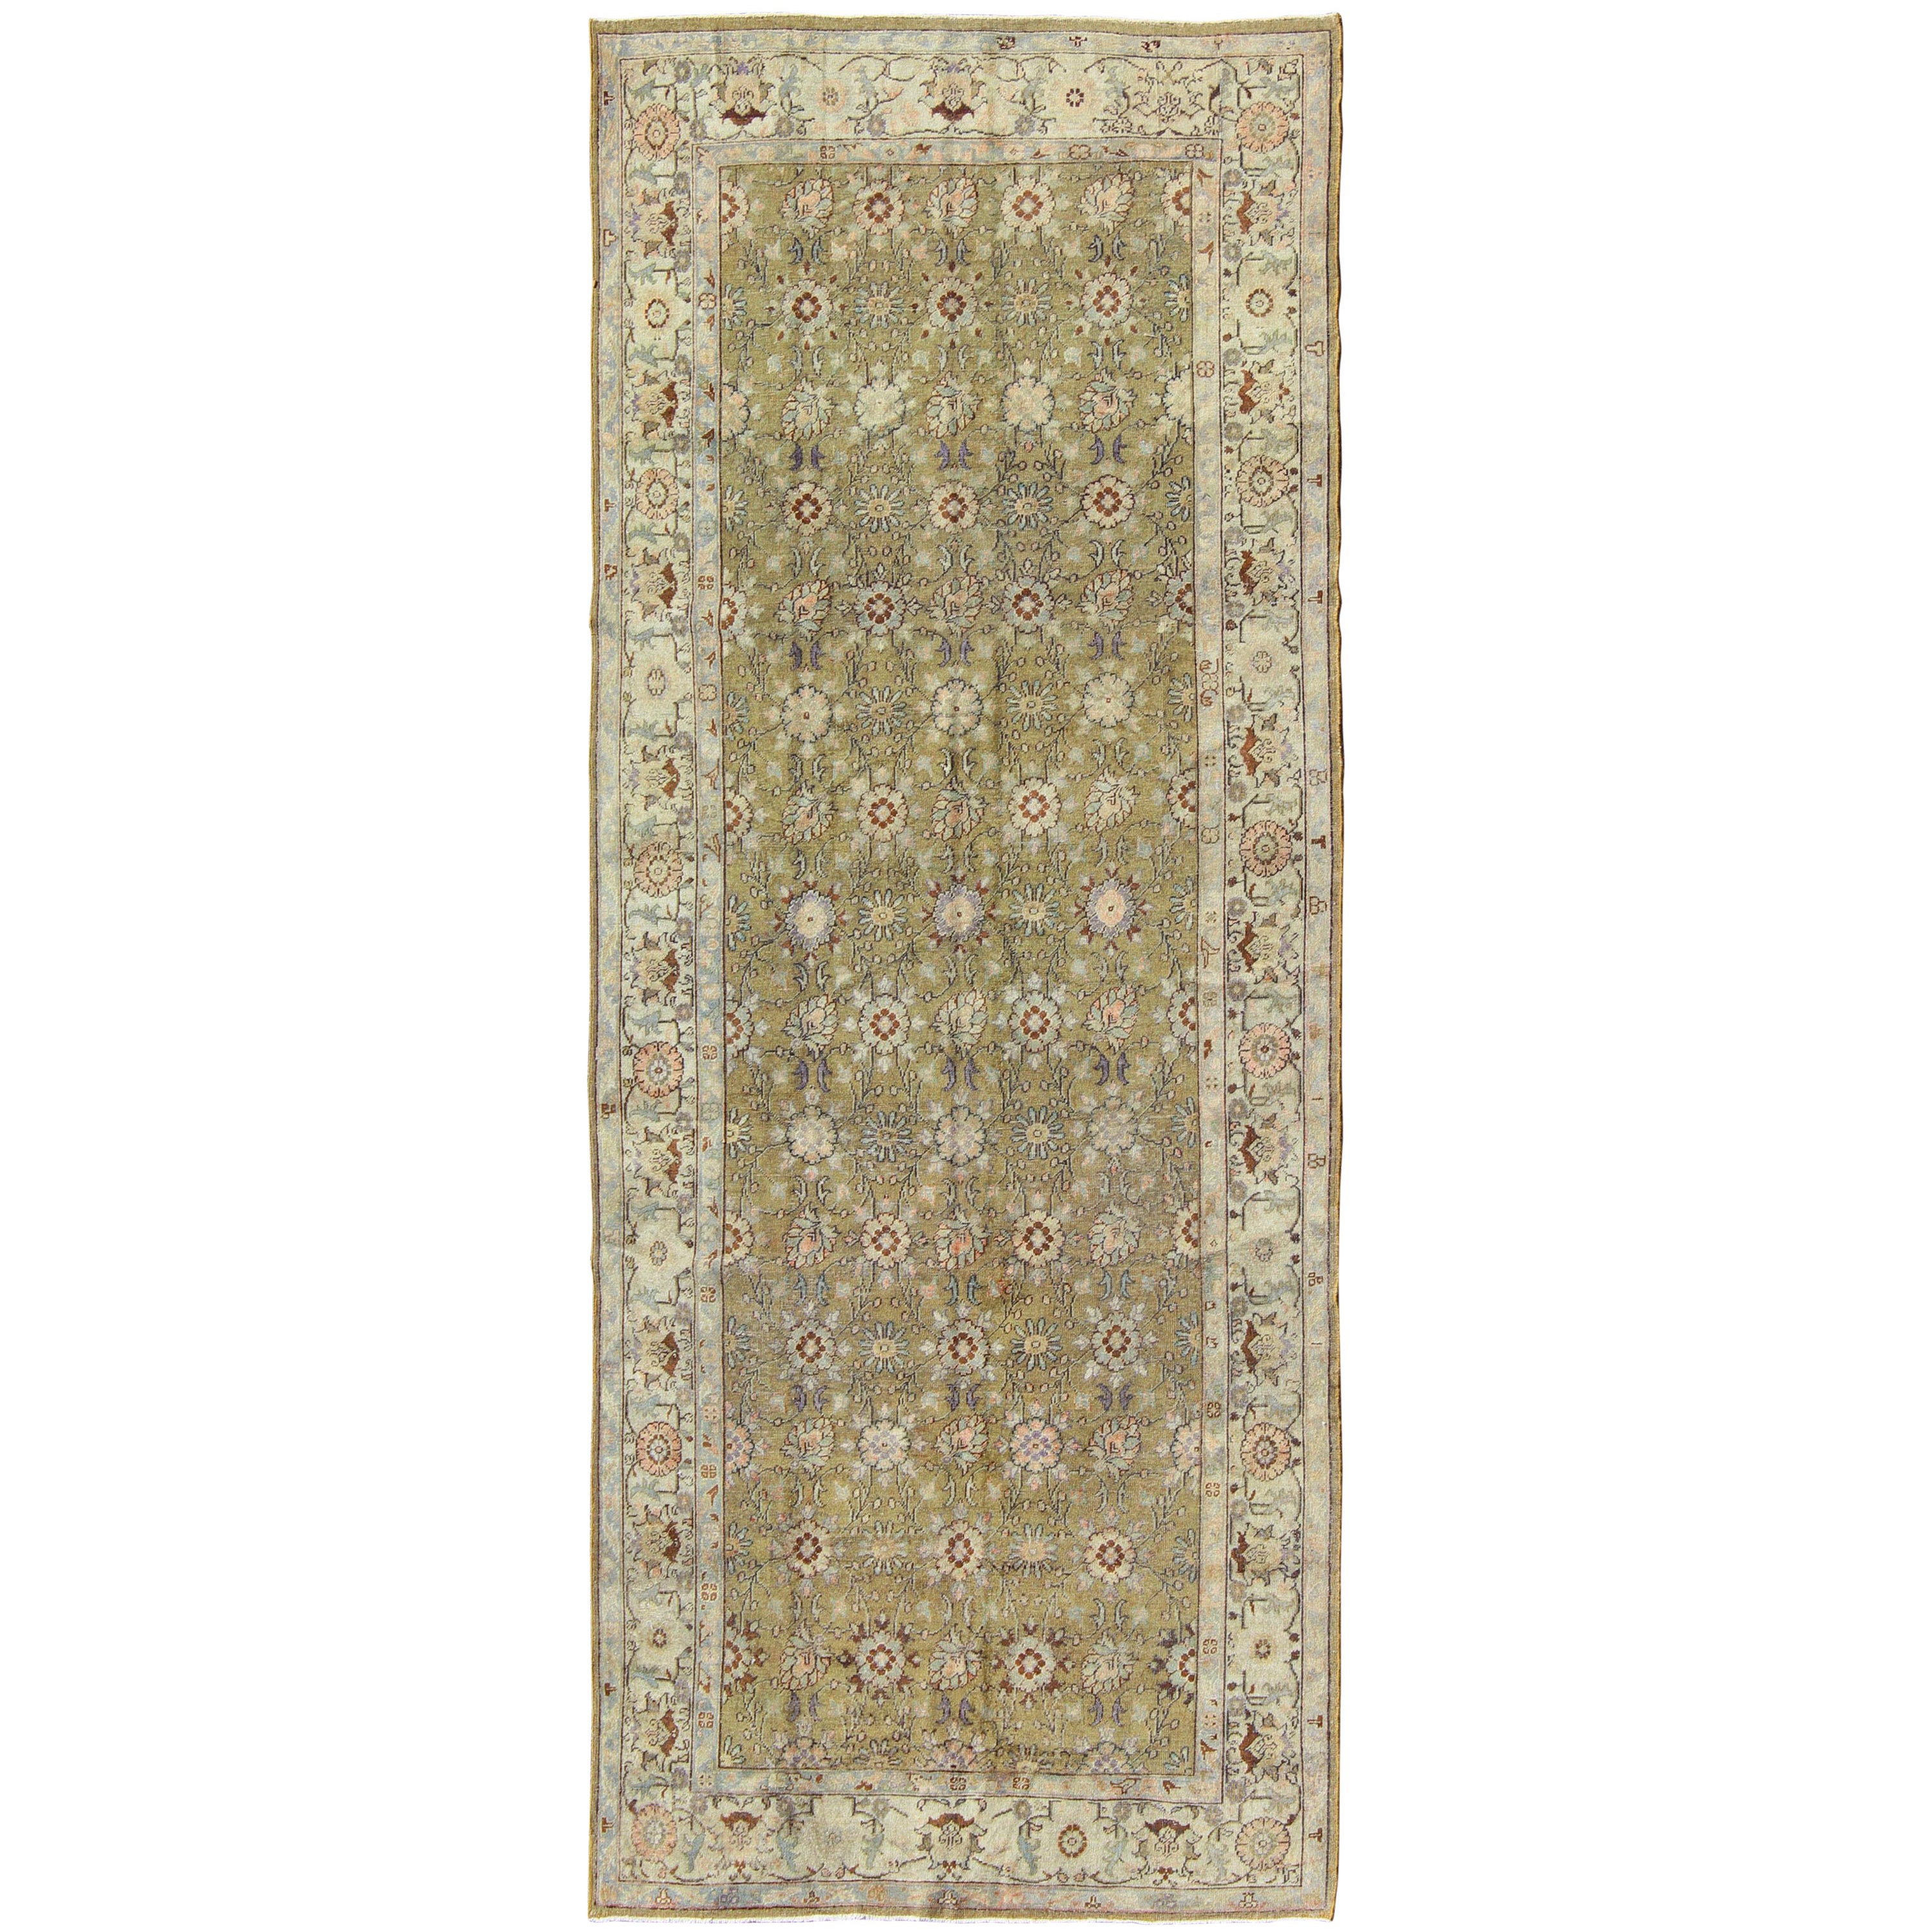 Green Background Antique Oushak Rug with Silver and Light Blue Border For Sale